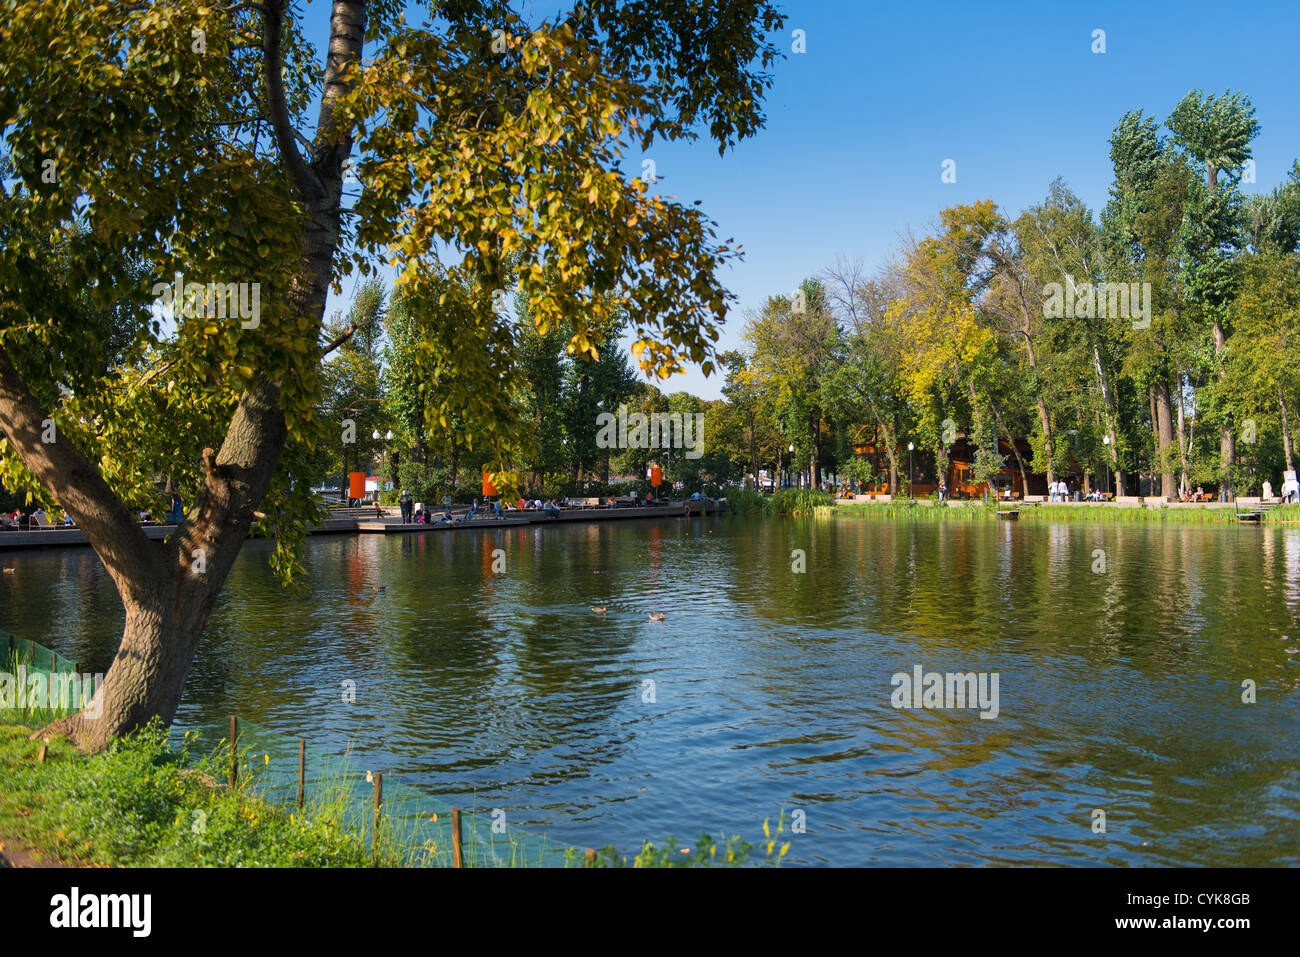 Gorky park pond, Moscow, Russia Stock Photo